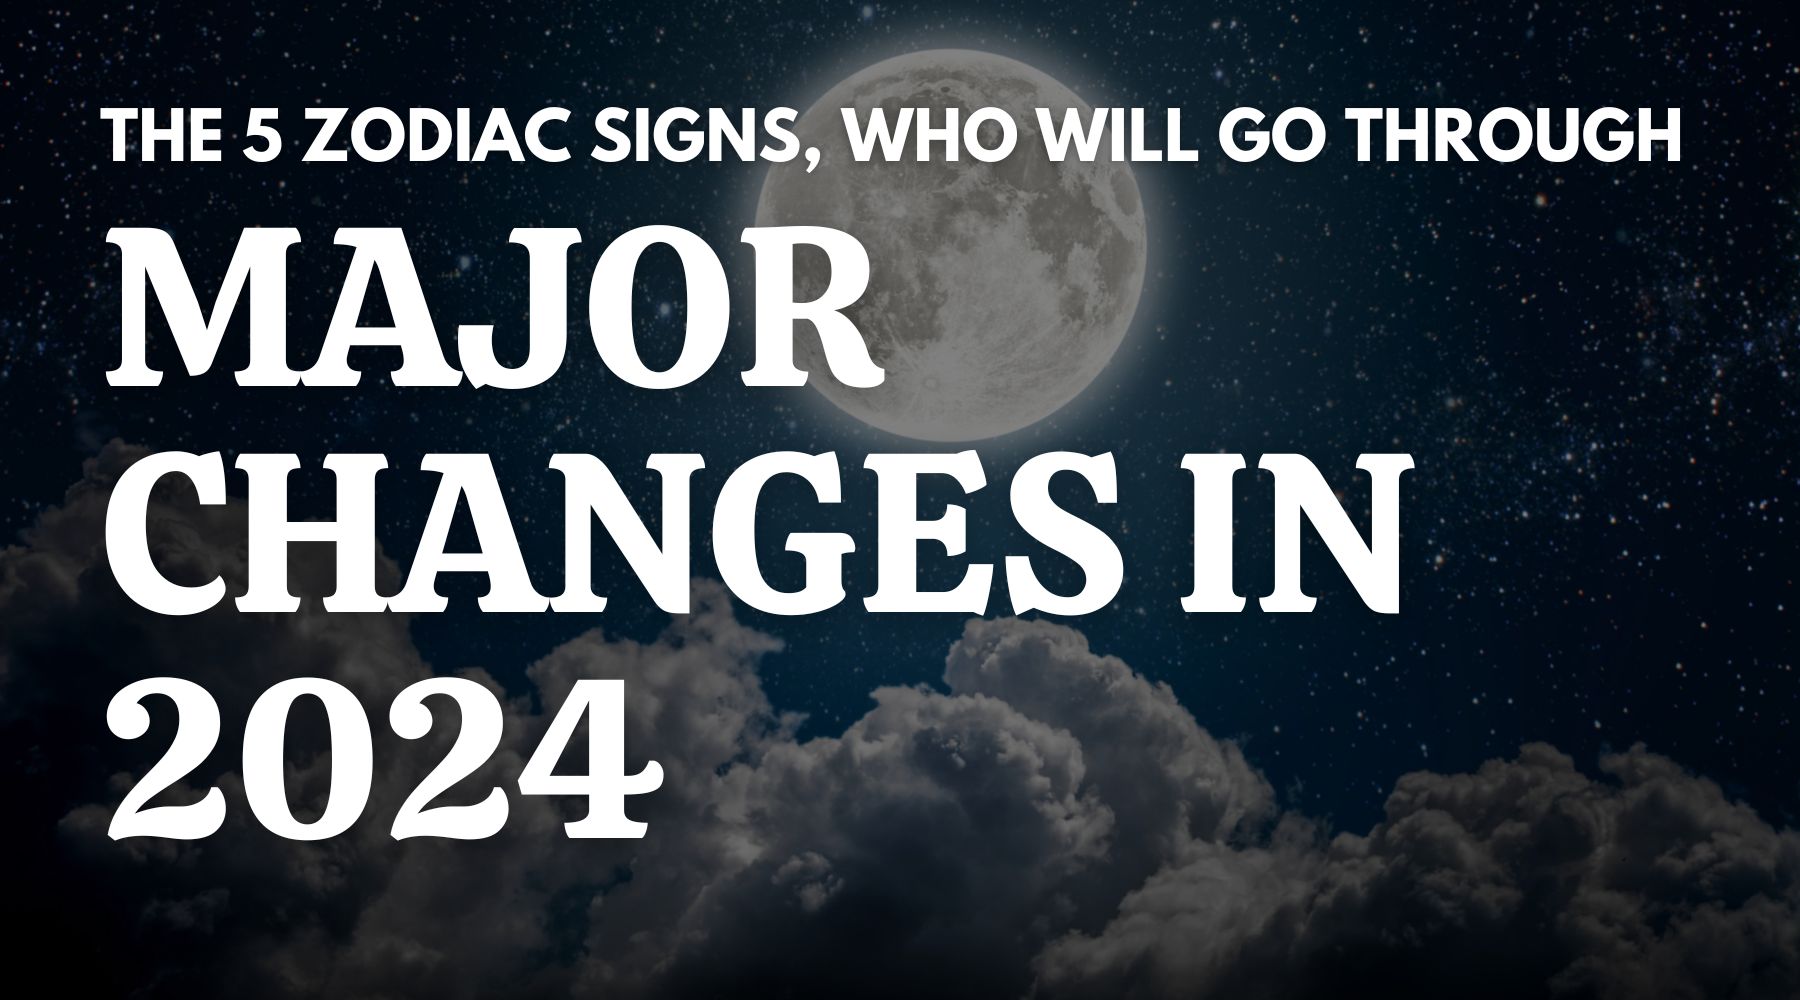 The Zodiac Signs That Will Go Through Major Changes In 2024